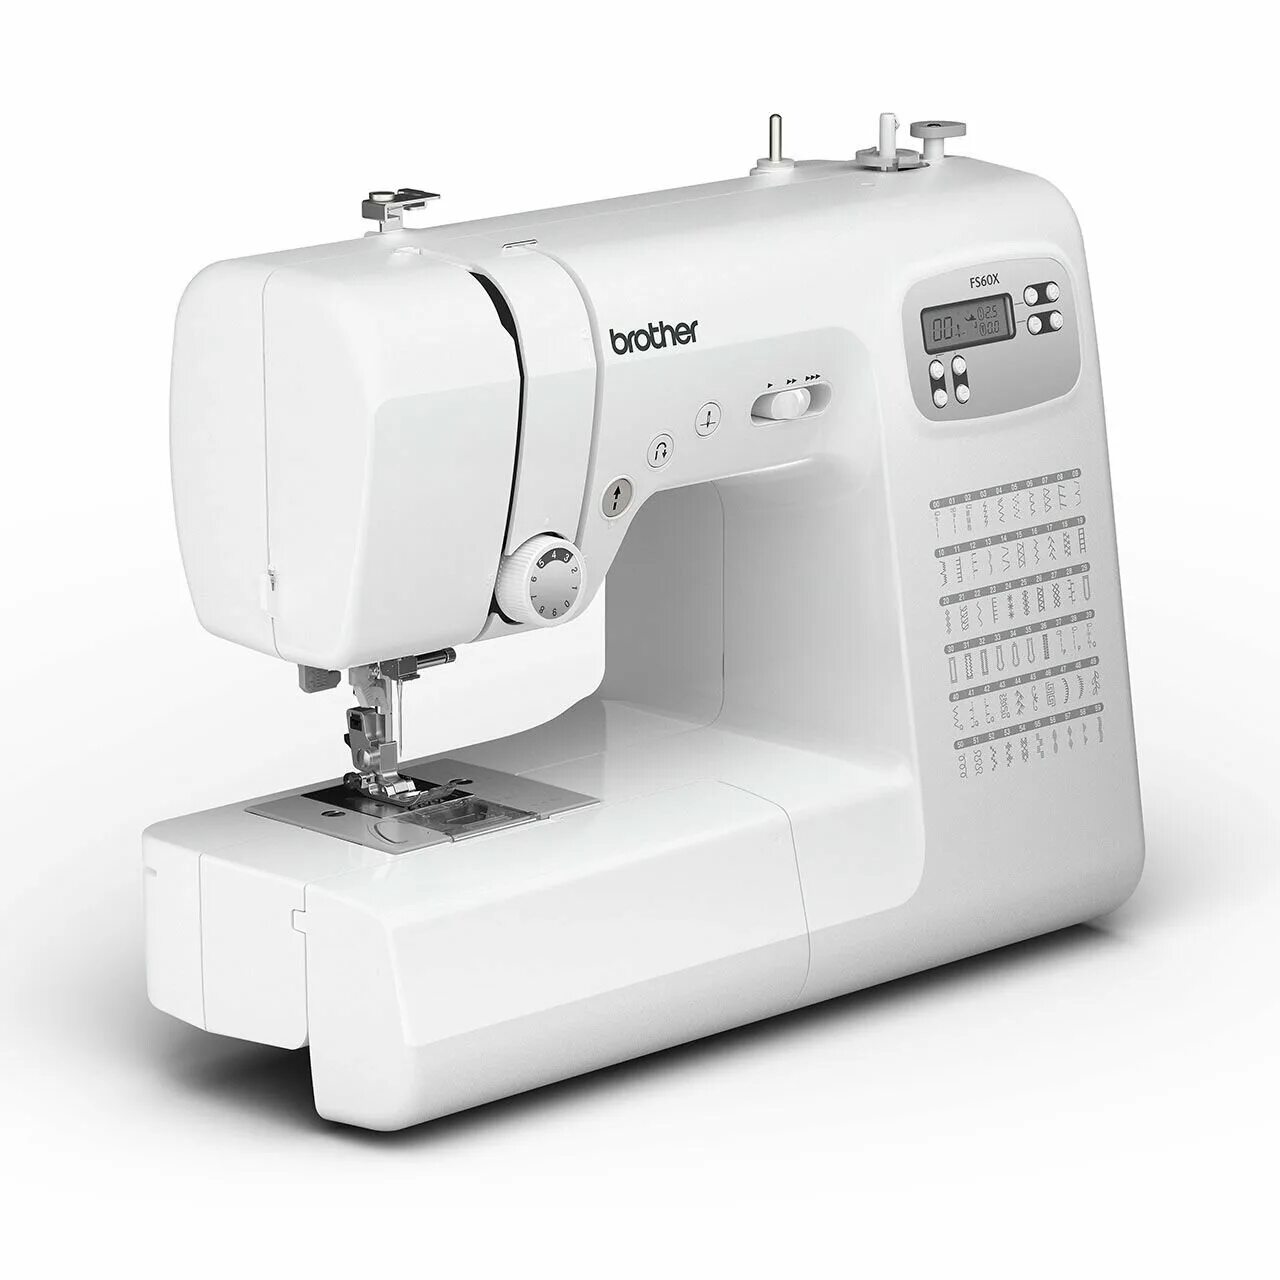 Brother fs. Brother fs60x. Швейная машинка brother FS 70 E. Brother Sewing Machine. Б brother fs70e лапки.